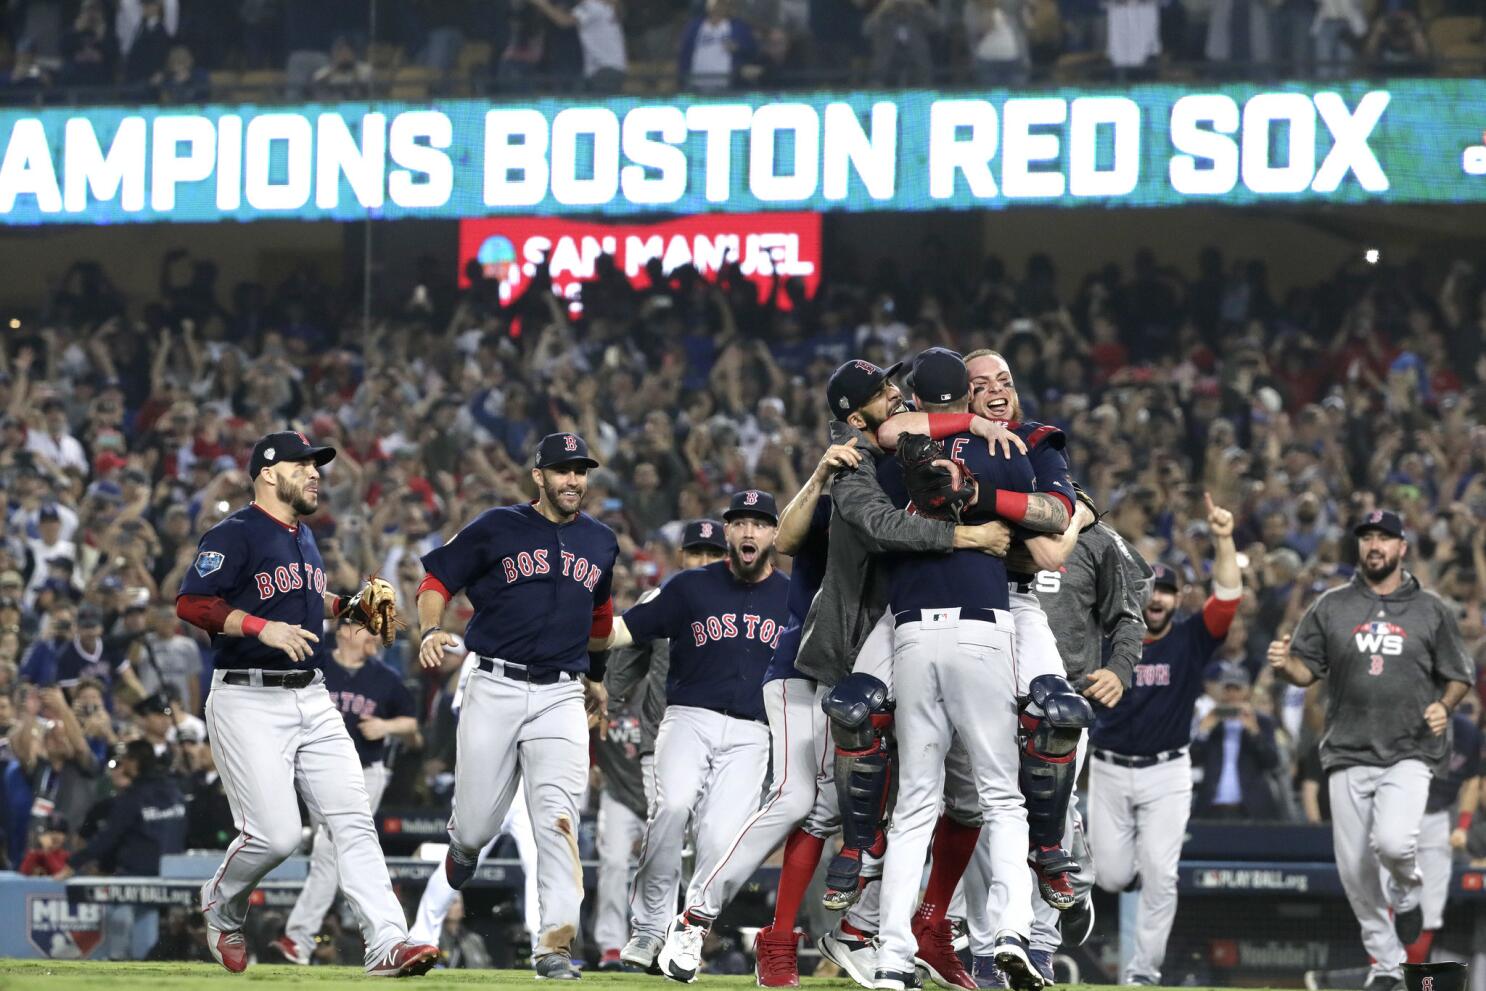 2018 Boston Red Sox World Series Champions Gear, Autographs, Guide